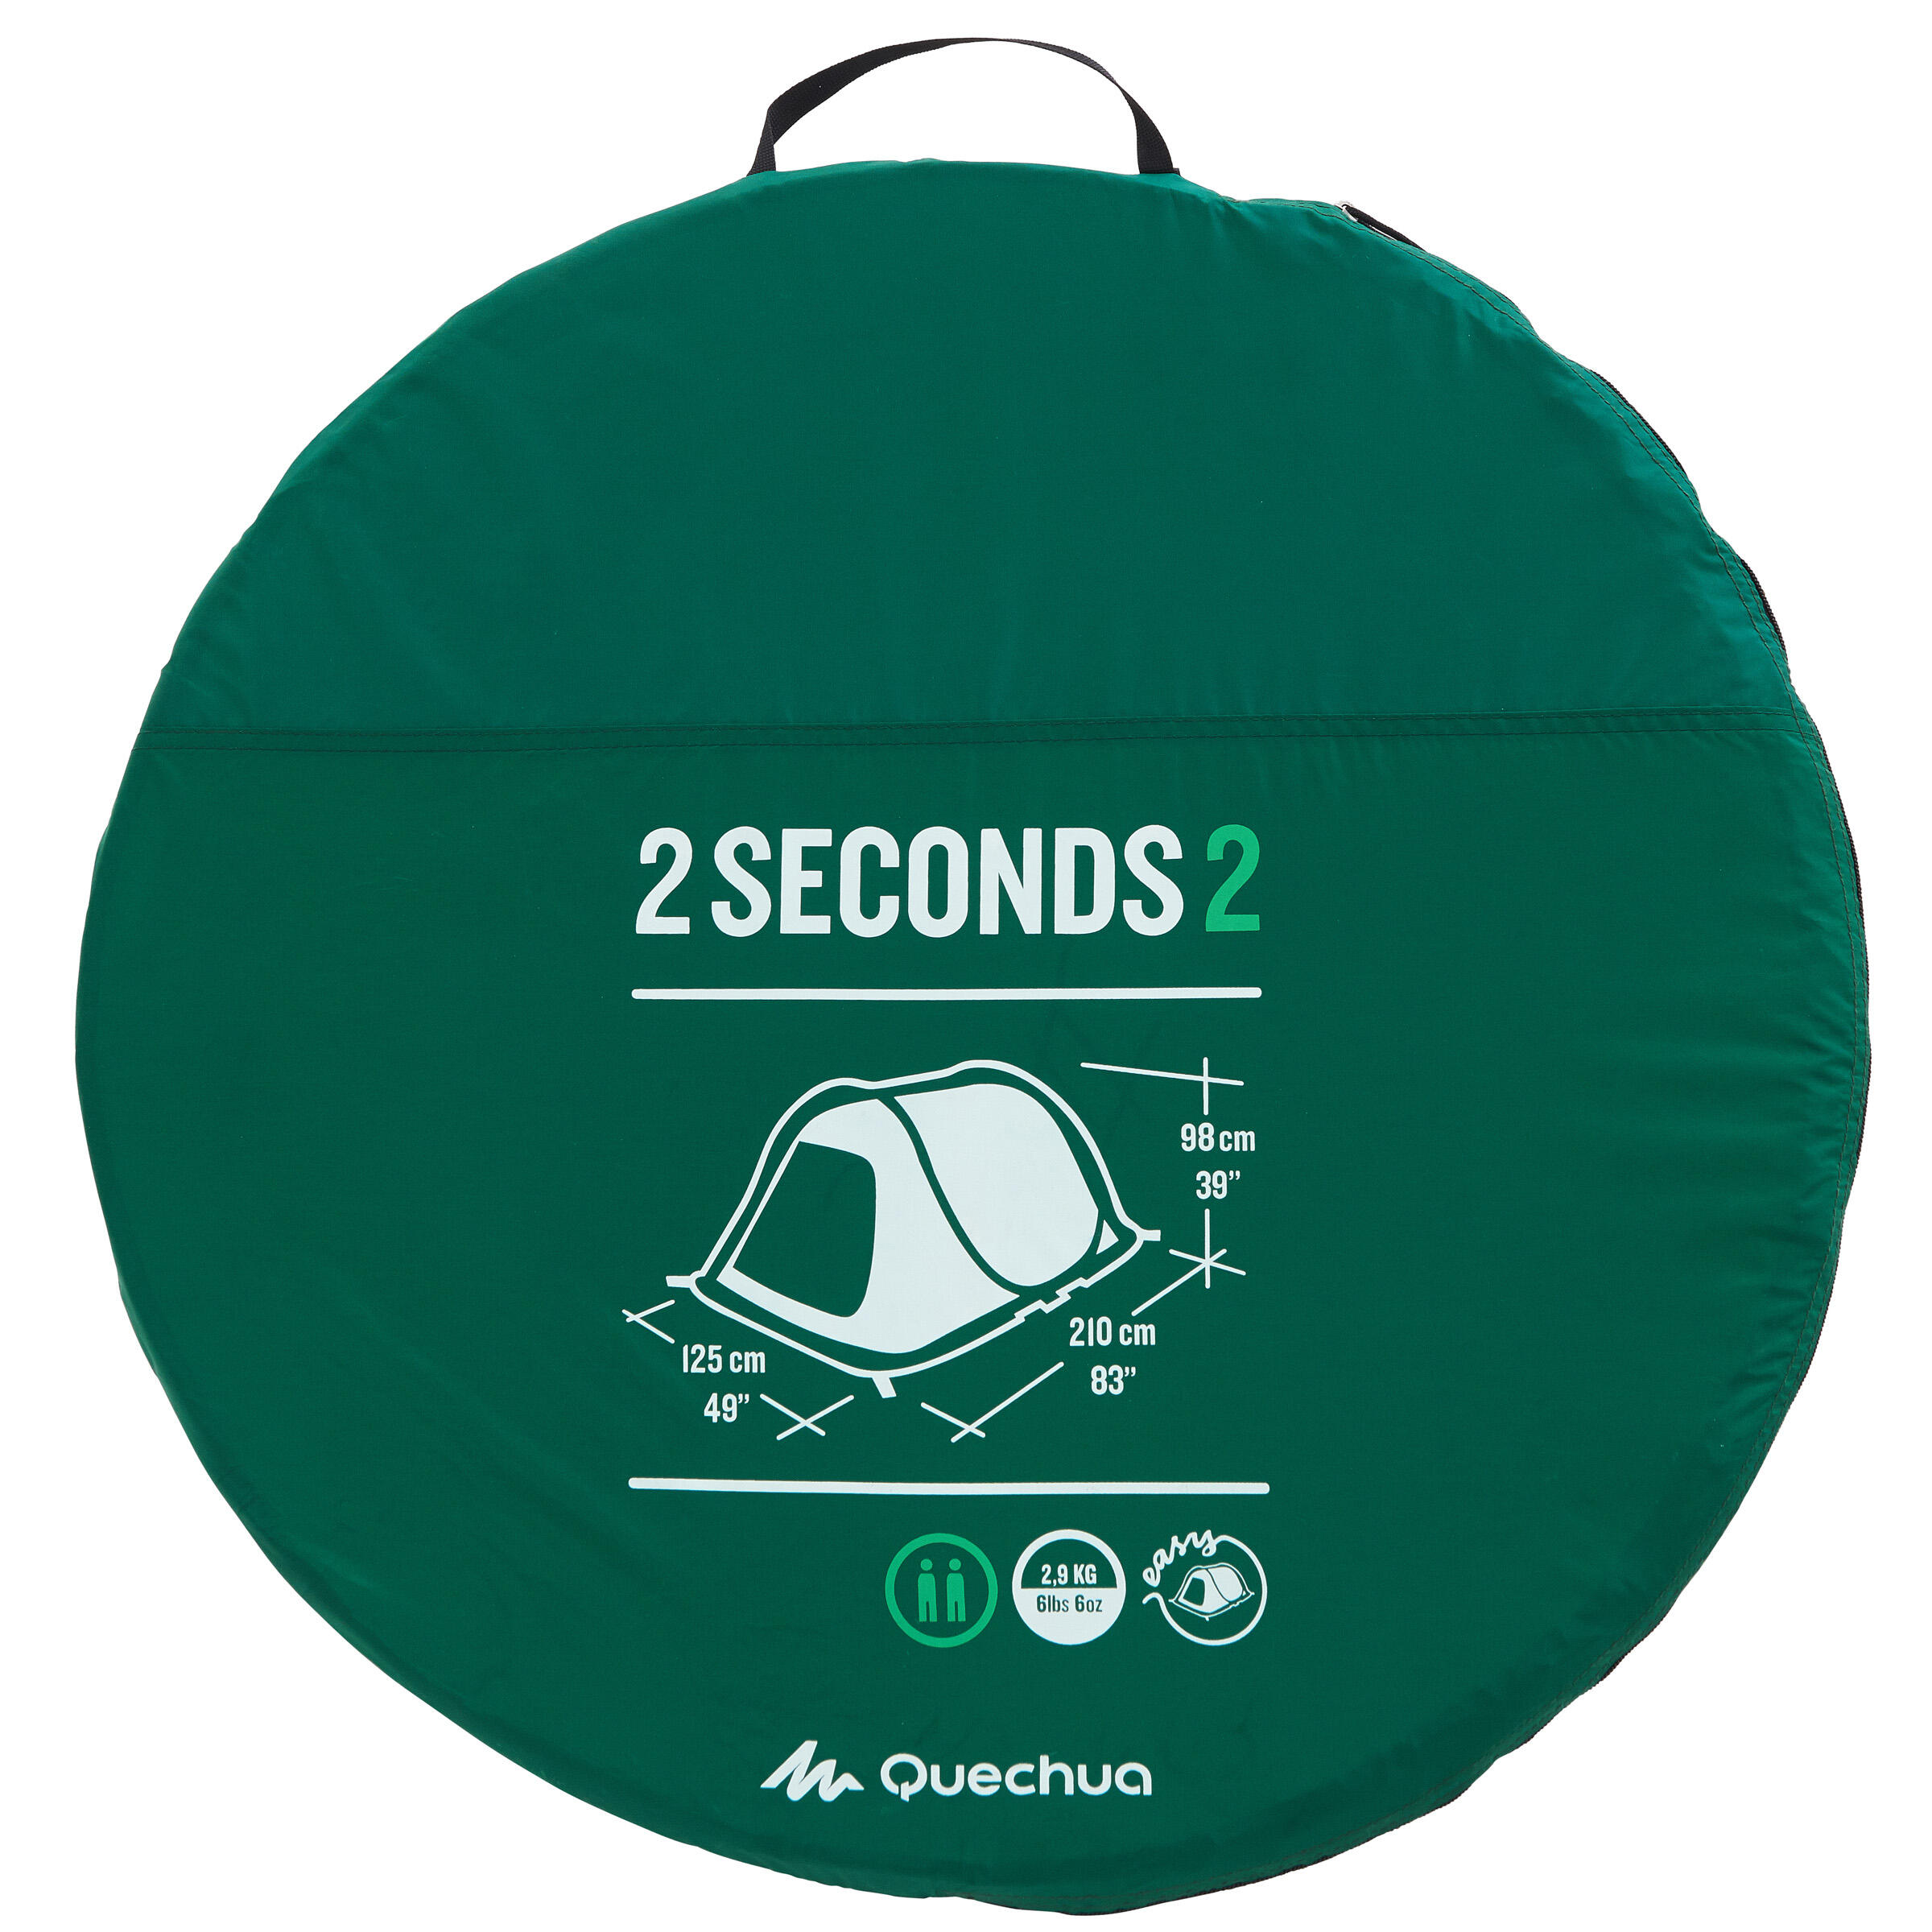 two seconds tent